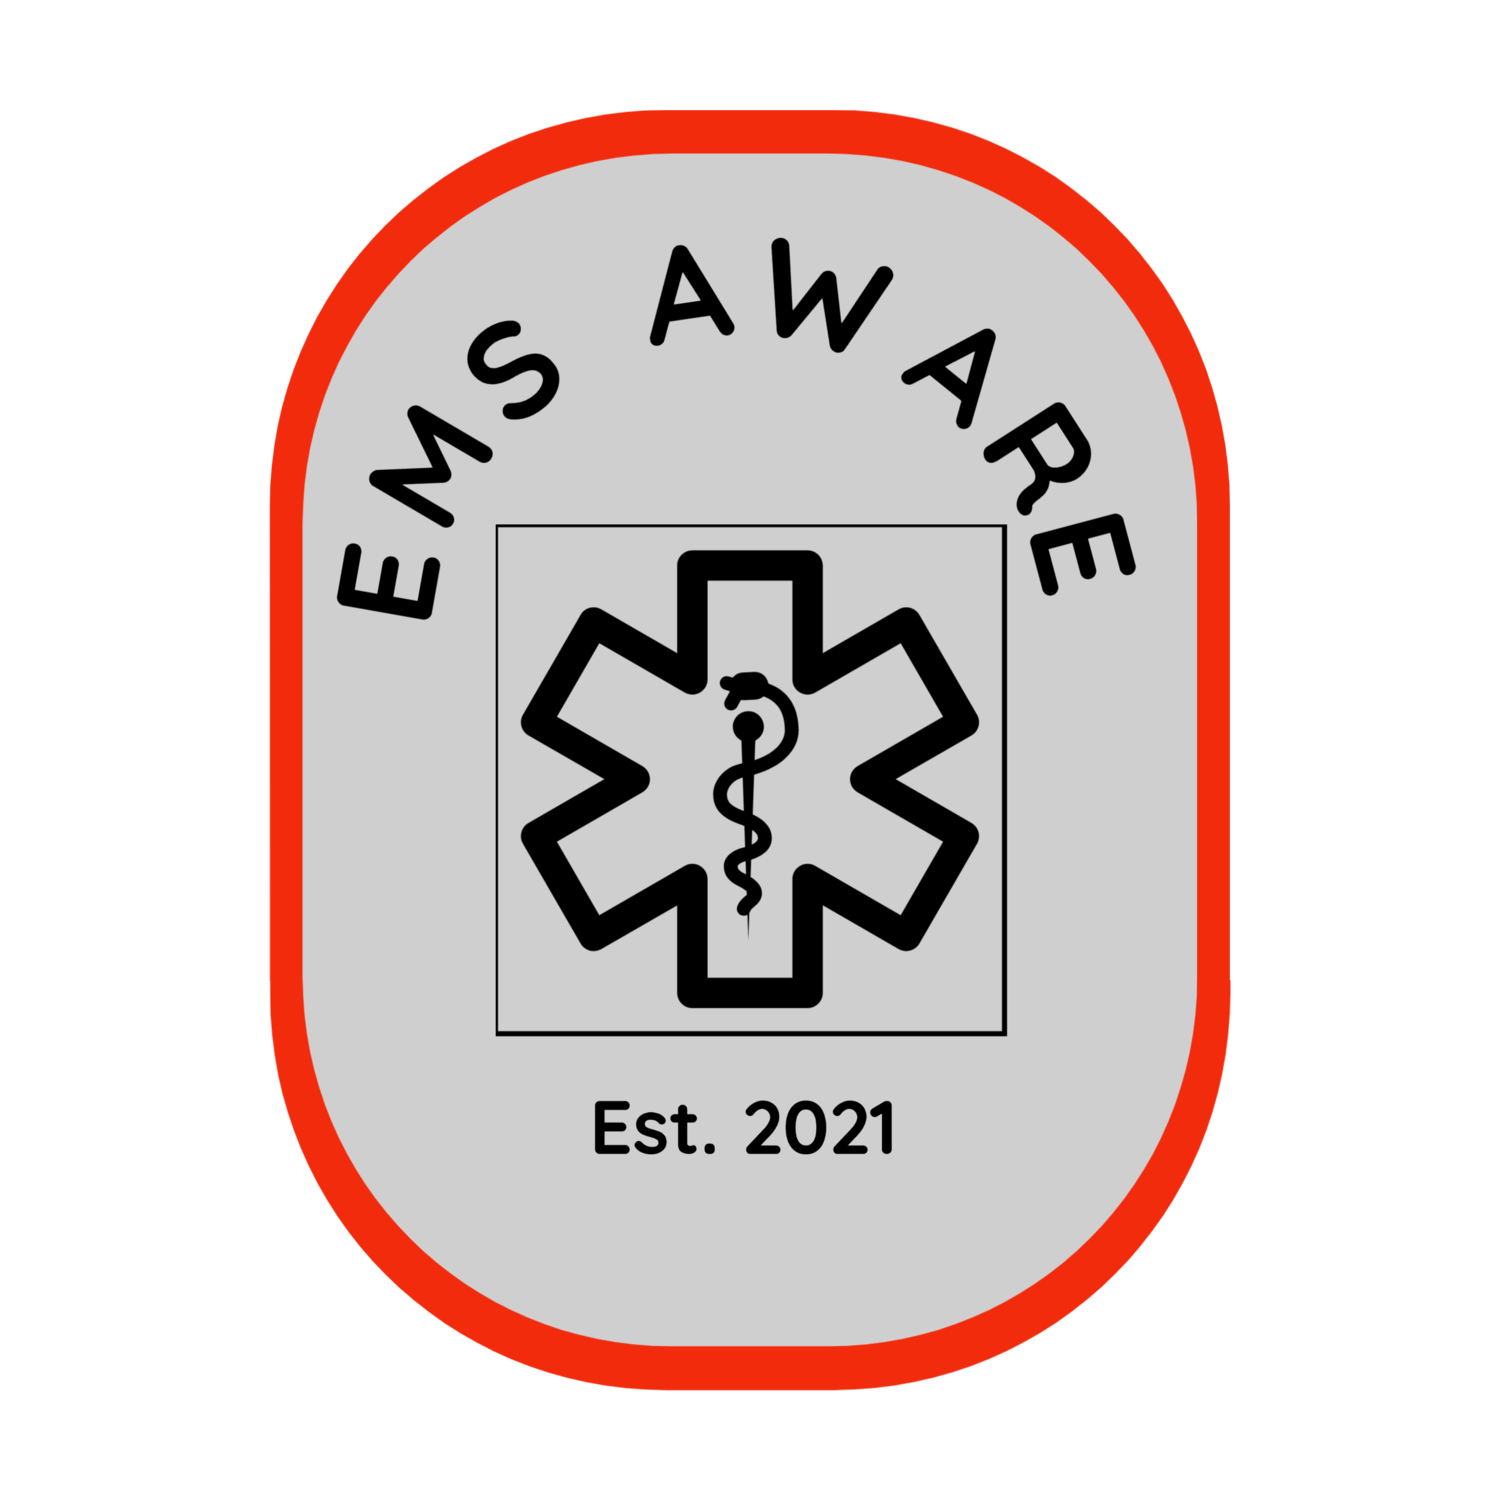 What Is EMS?